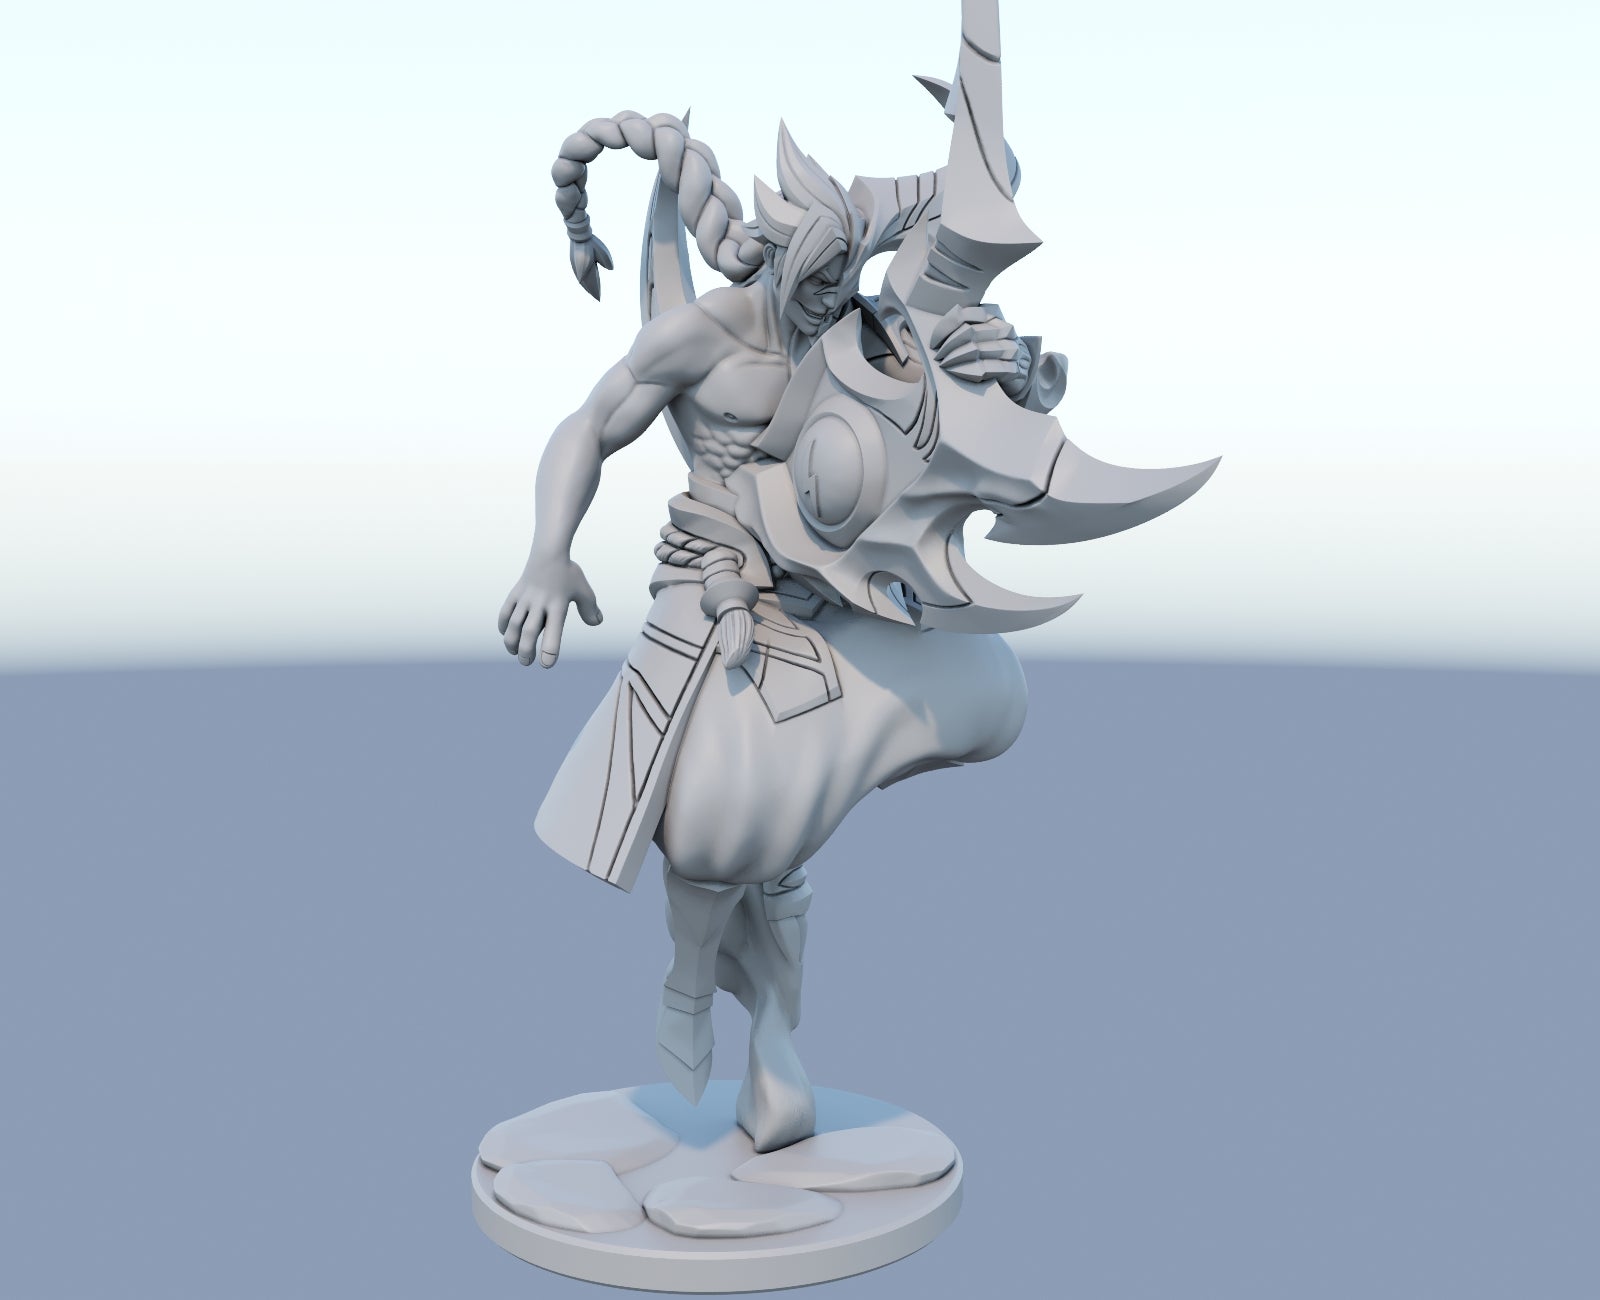 Kayn 3D-printed League of Legends champion figure. Decorate your gaming setup or home with your favorite League of Legends champion! Choose between the unpainted version, perfect for you to paint yourself, or the hand-painted version by a professional painter. Order your figure today!